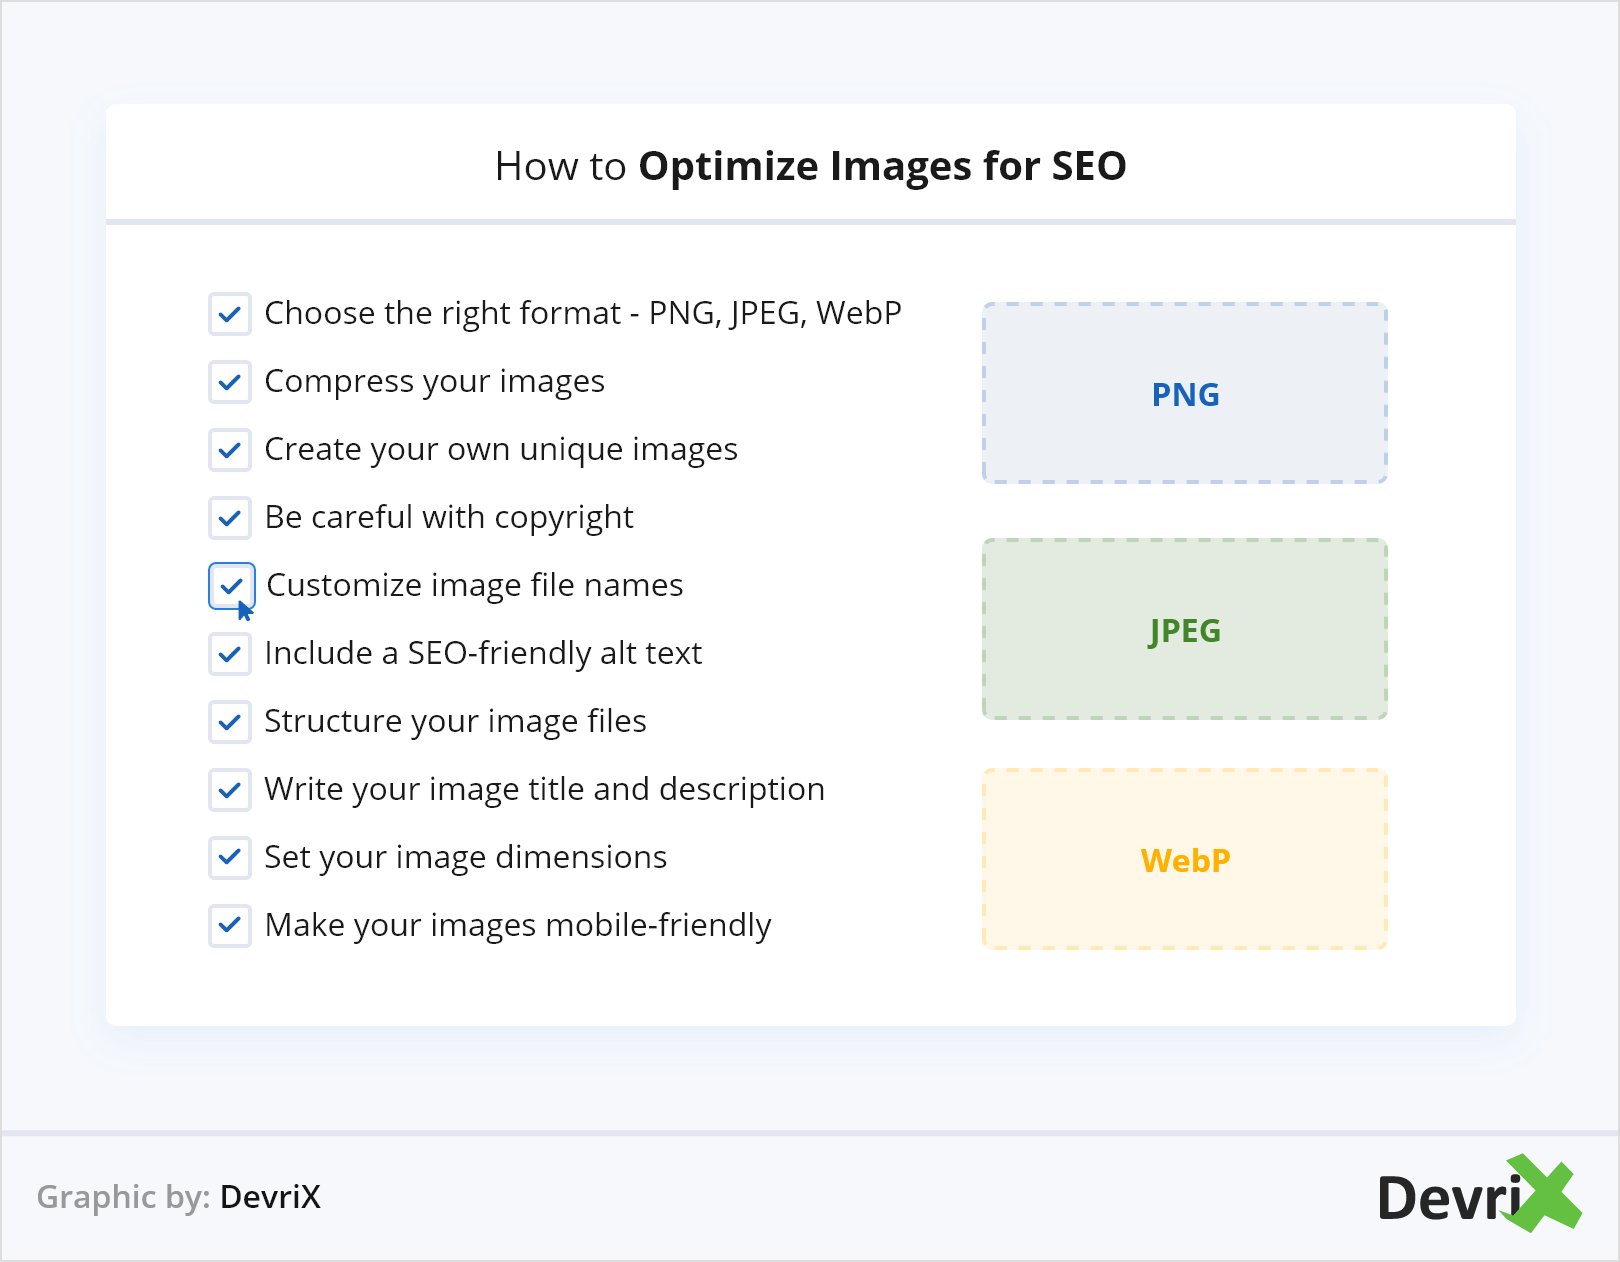 How to Optimize Your Images for SEO